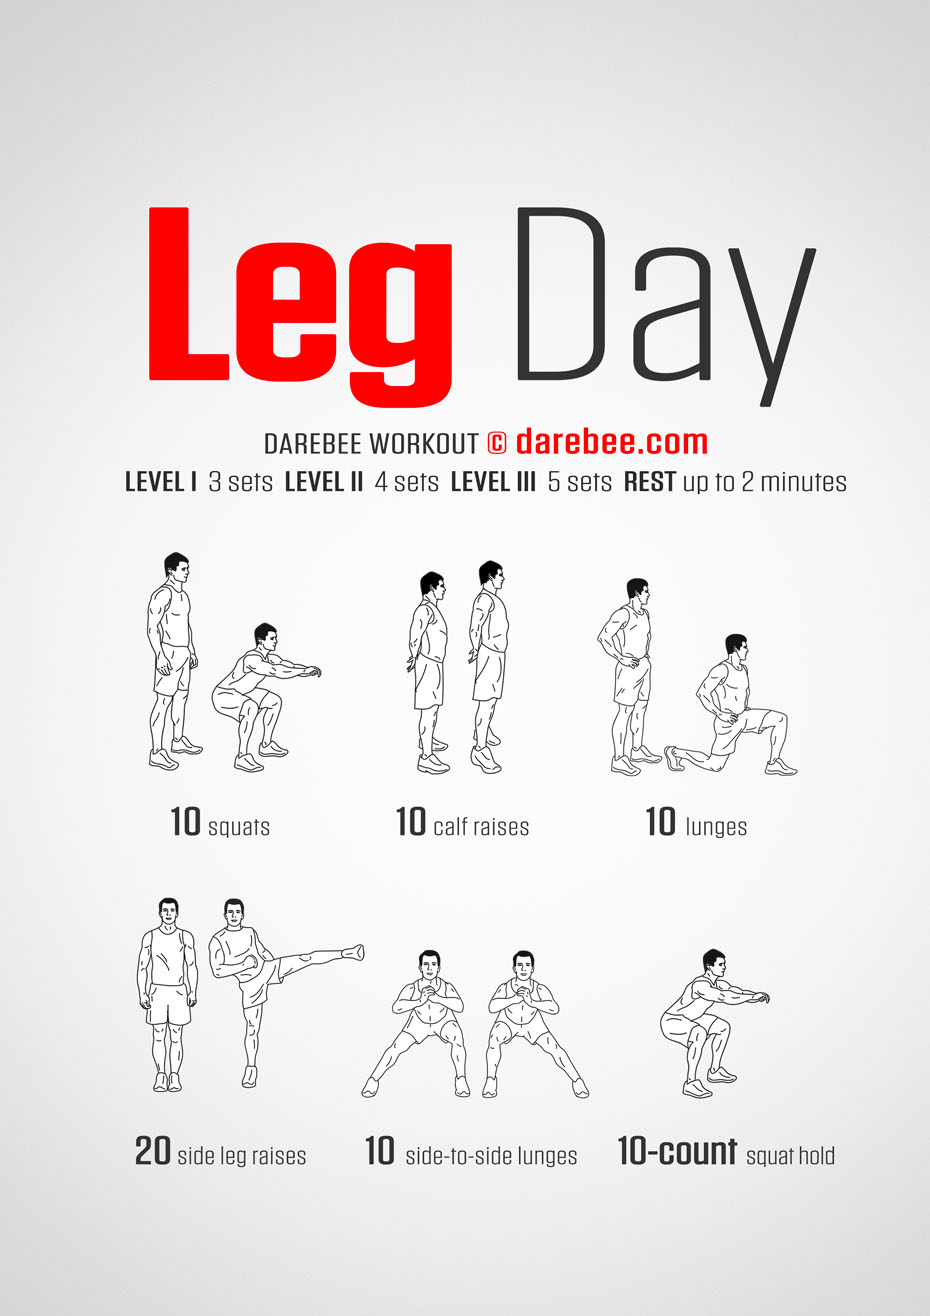 6 Day Legs Workout Routine For Ladies for Build Muscle